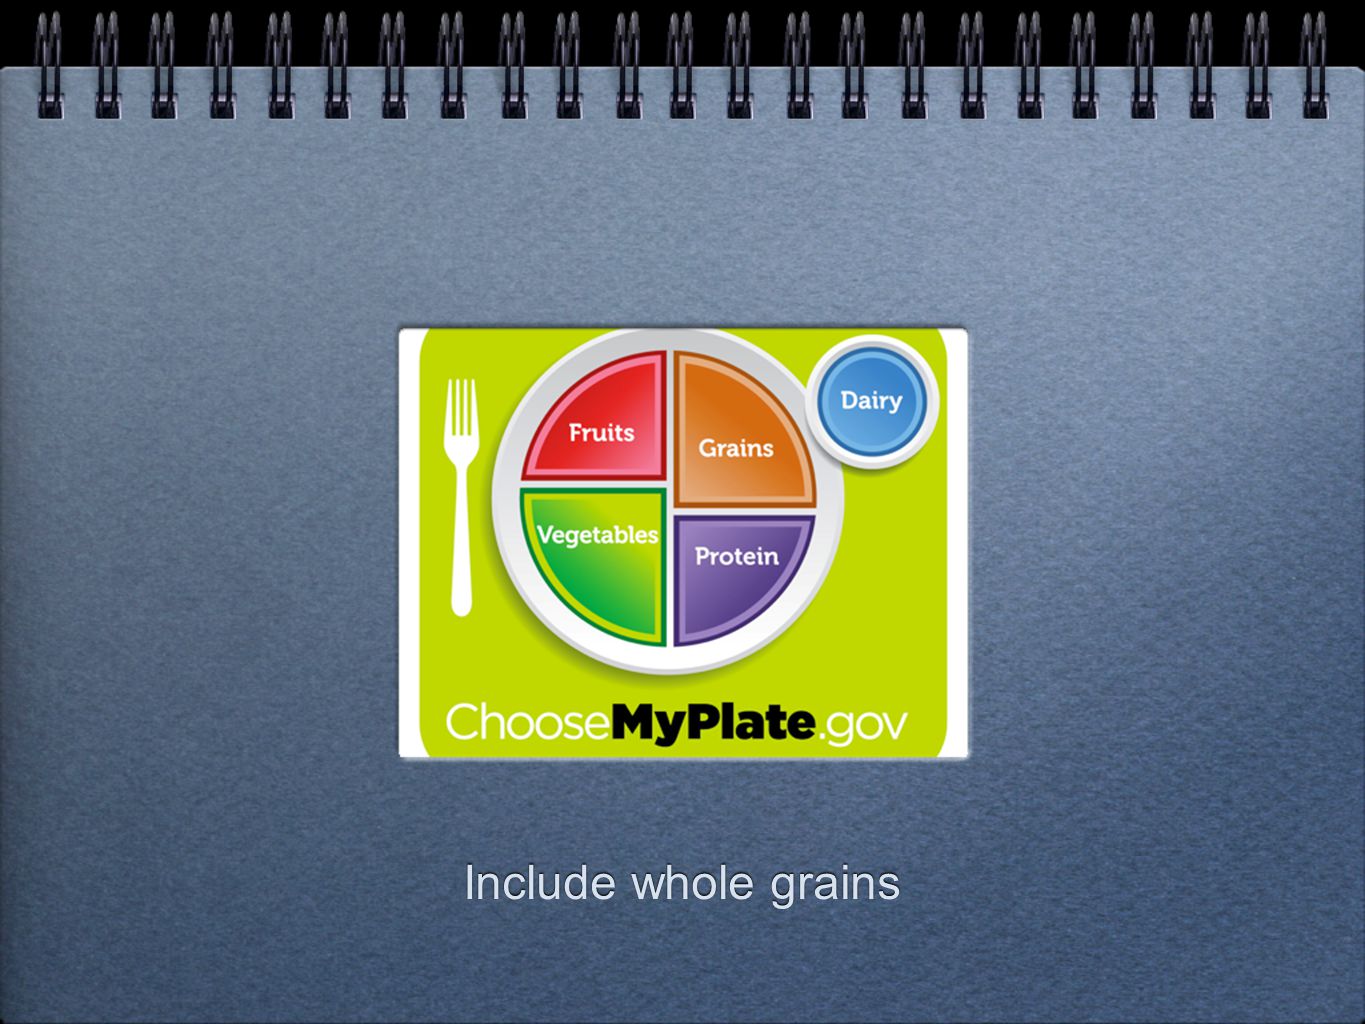 Include whole grains